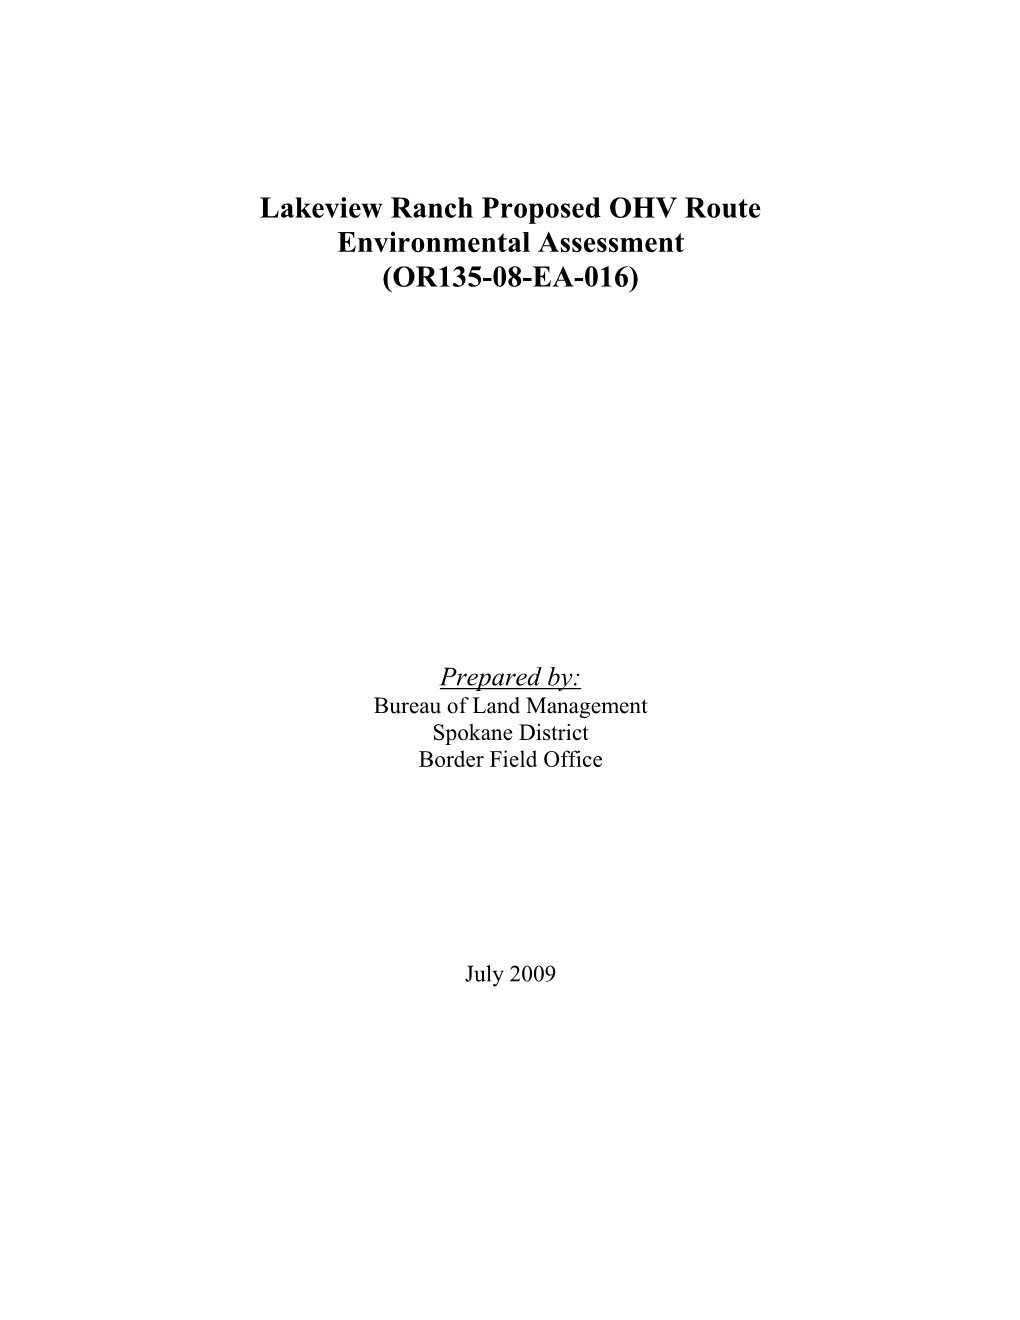 Lakeview Ranch Proposed OHV Route Environmental Assessment (OR135-08-EA-016)